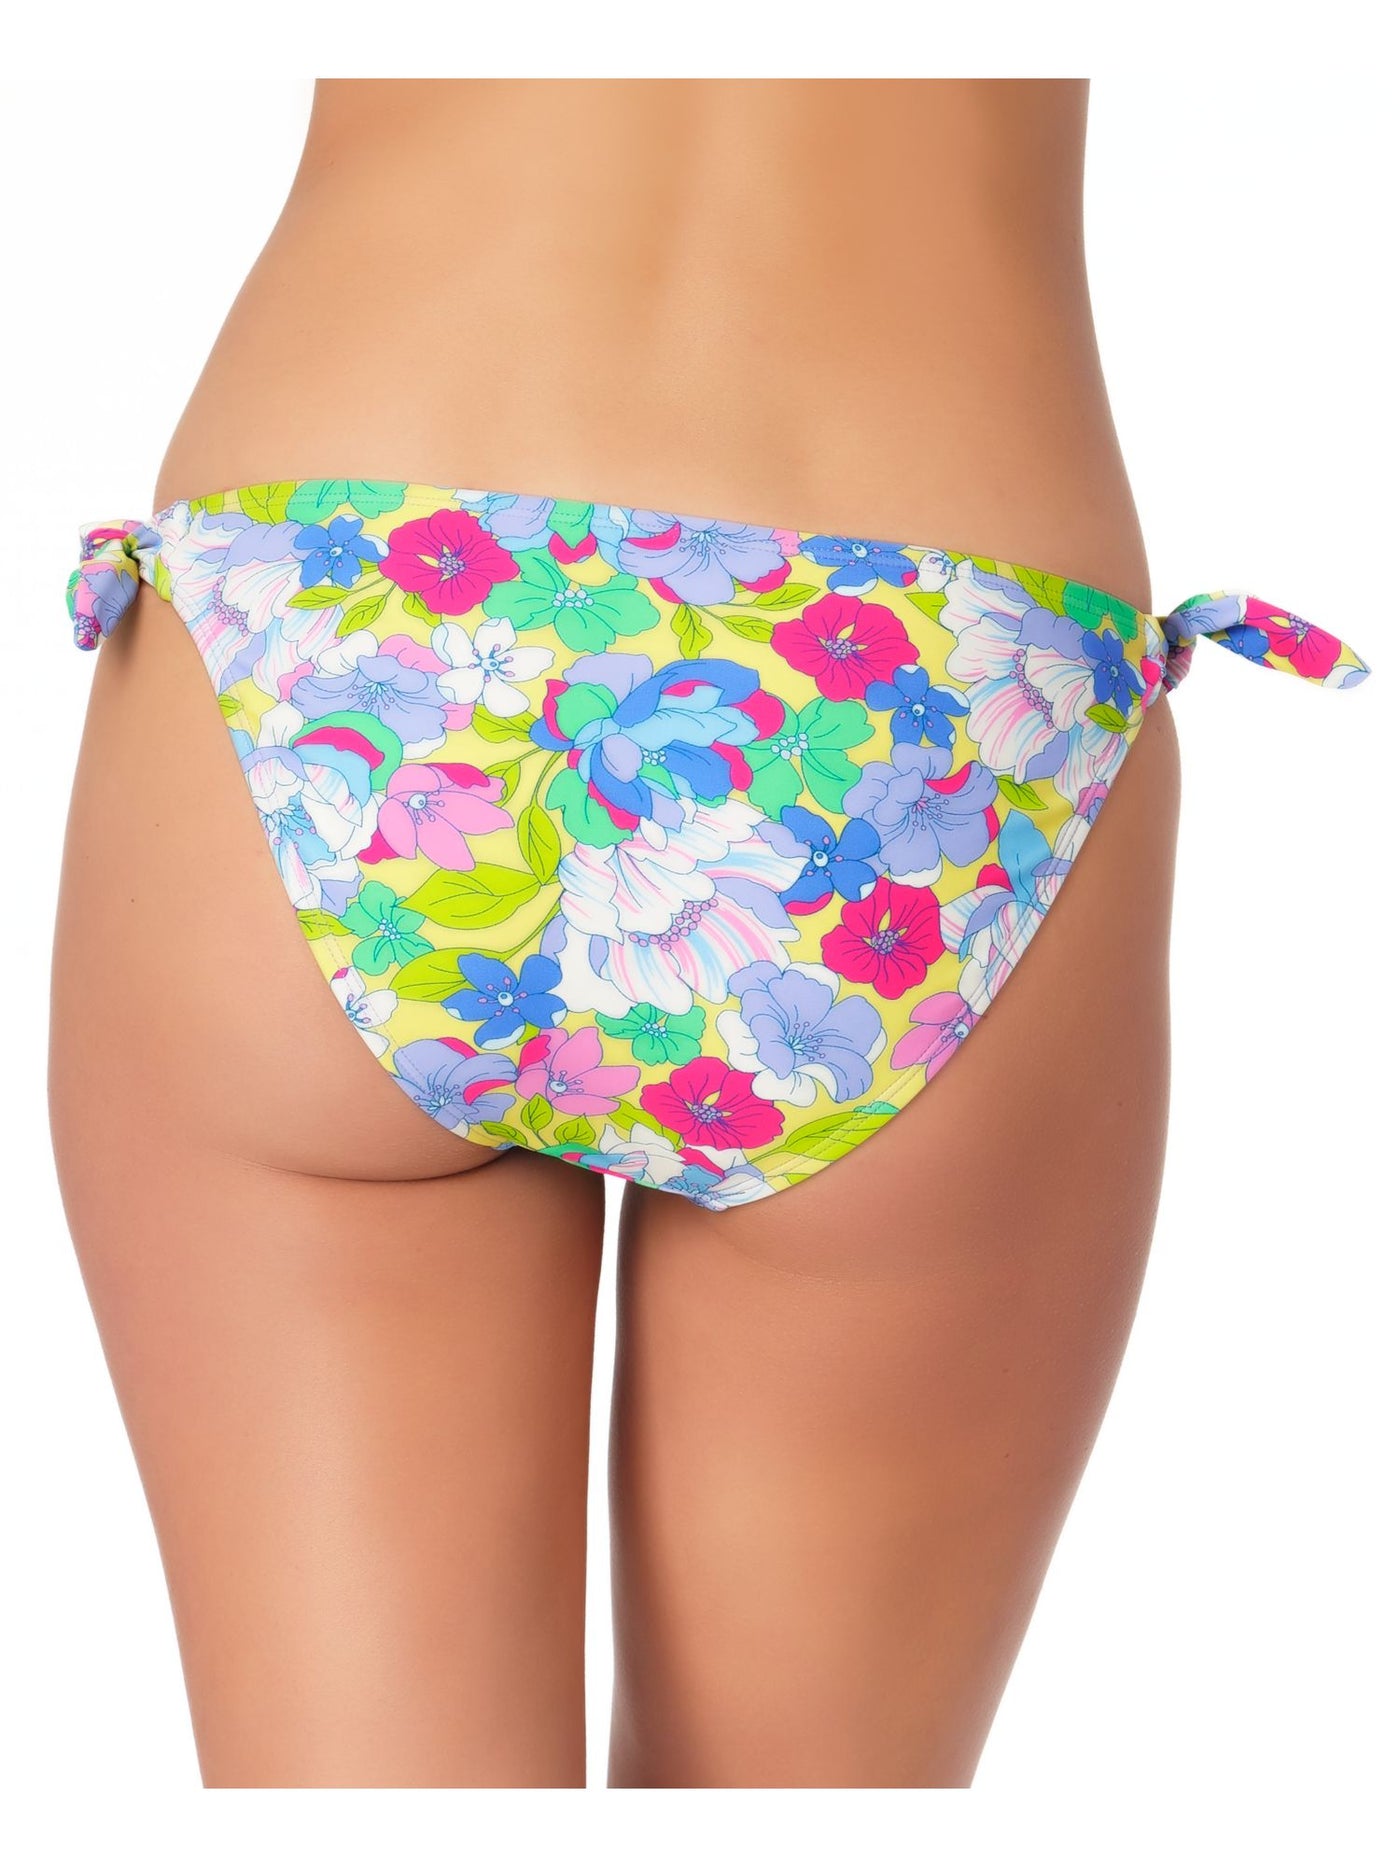 California Waves Women's Multi Color Floral Stretch LINED Moderate Coverage Tie Hipster Swimsuit Bottom L